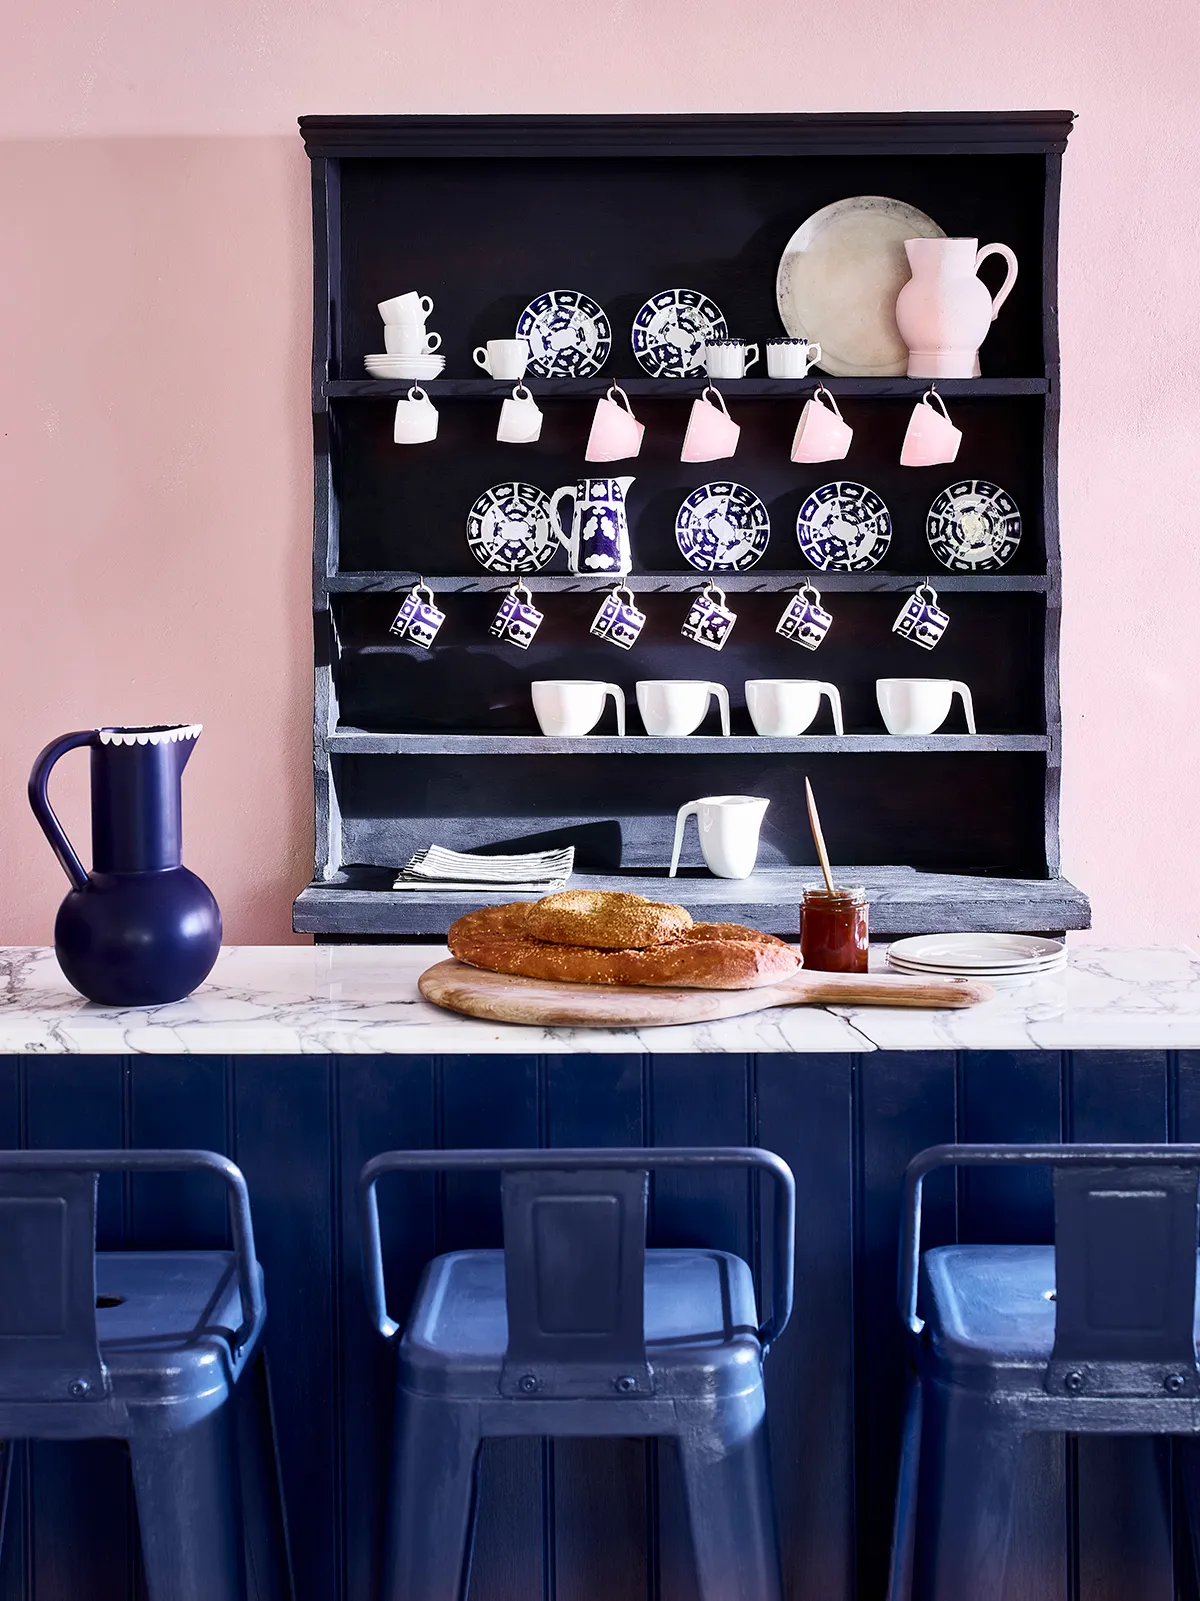 Kitchen Wall Paint In Antoinette, Chalk Paint In Oxford Navy And Napoleonic Blue, all Annie Sloan